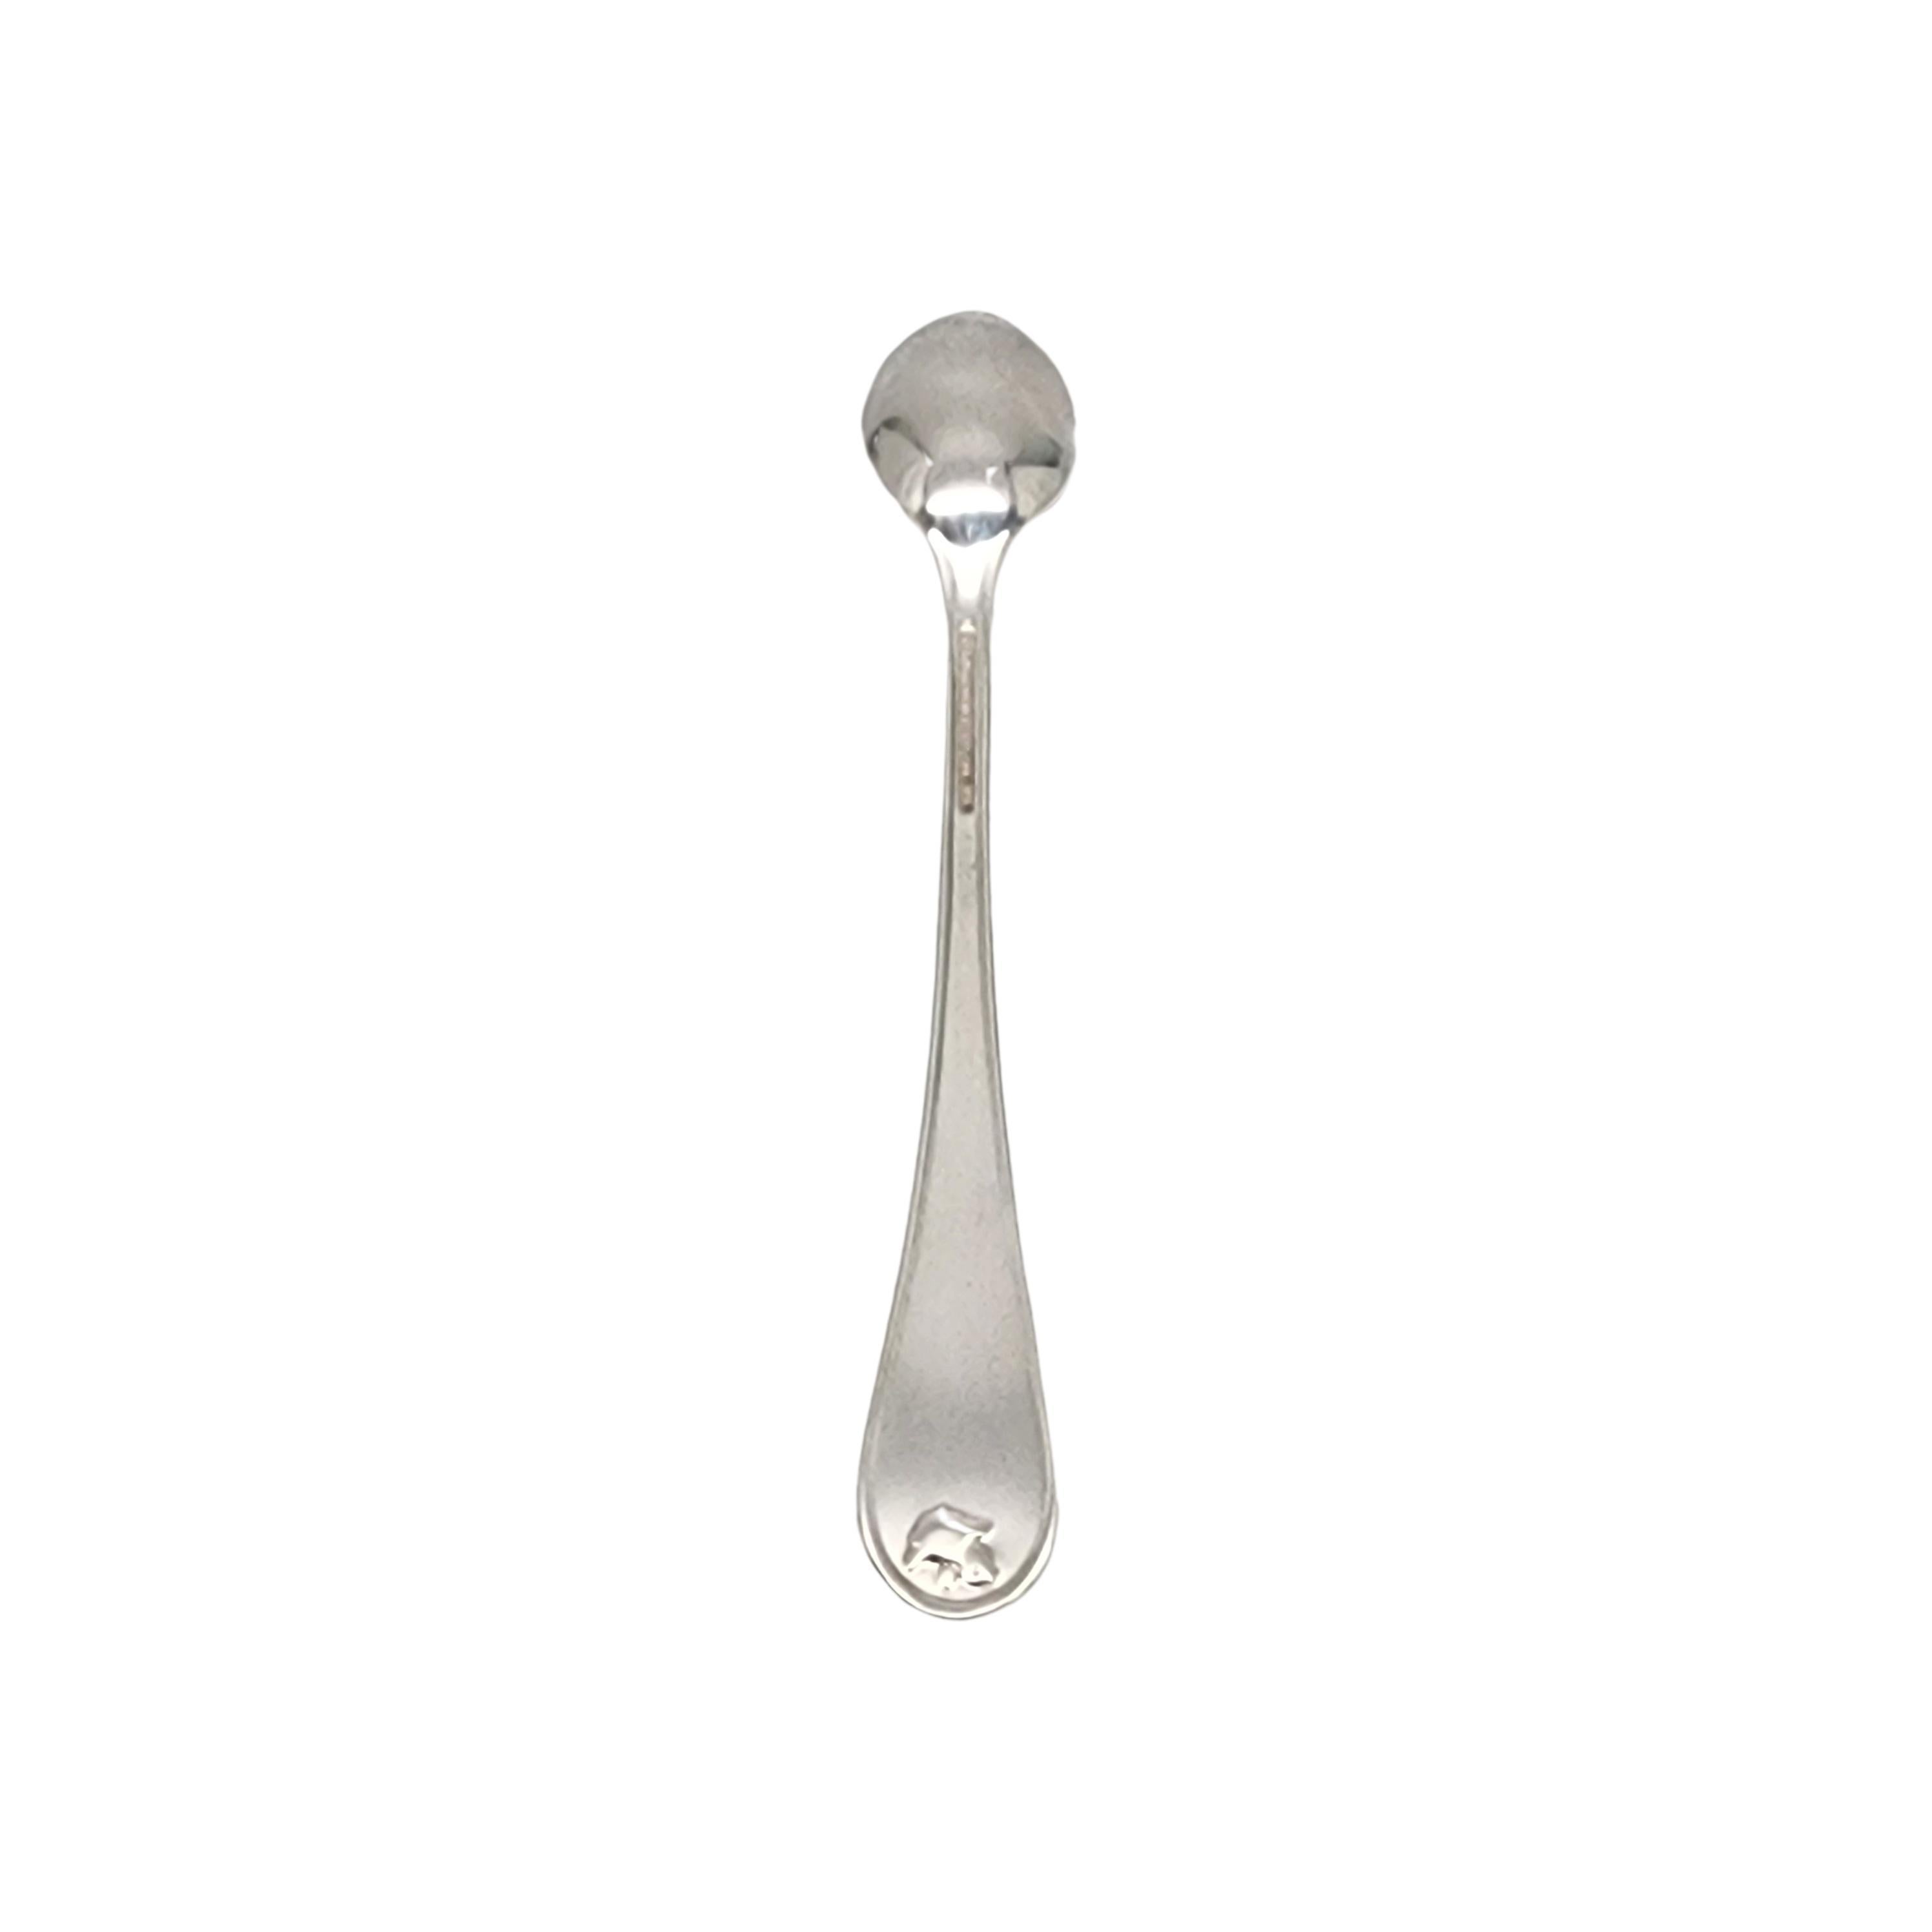 Tiffany & Co sterling silver Farm Animals baby feeding spoon with pouch.

A simple and classic design featuring a sheep, pig and duck down the front of the handle and a small bird on top of the back of the handle. No monogram or engraving. Includes